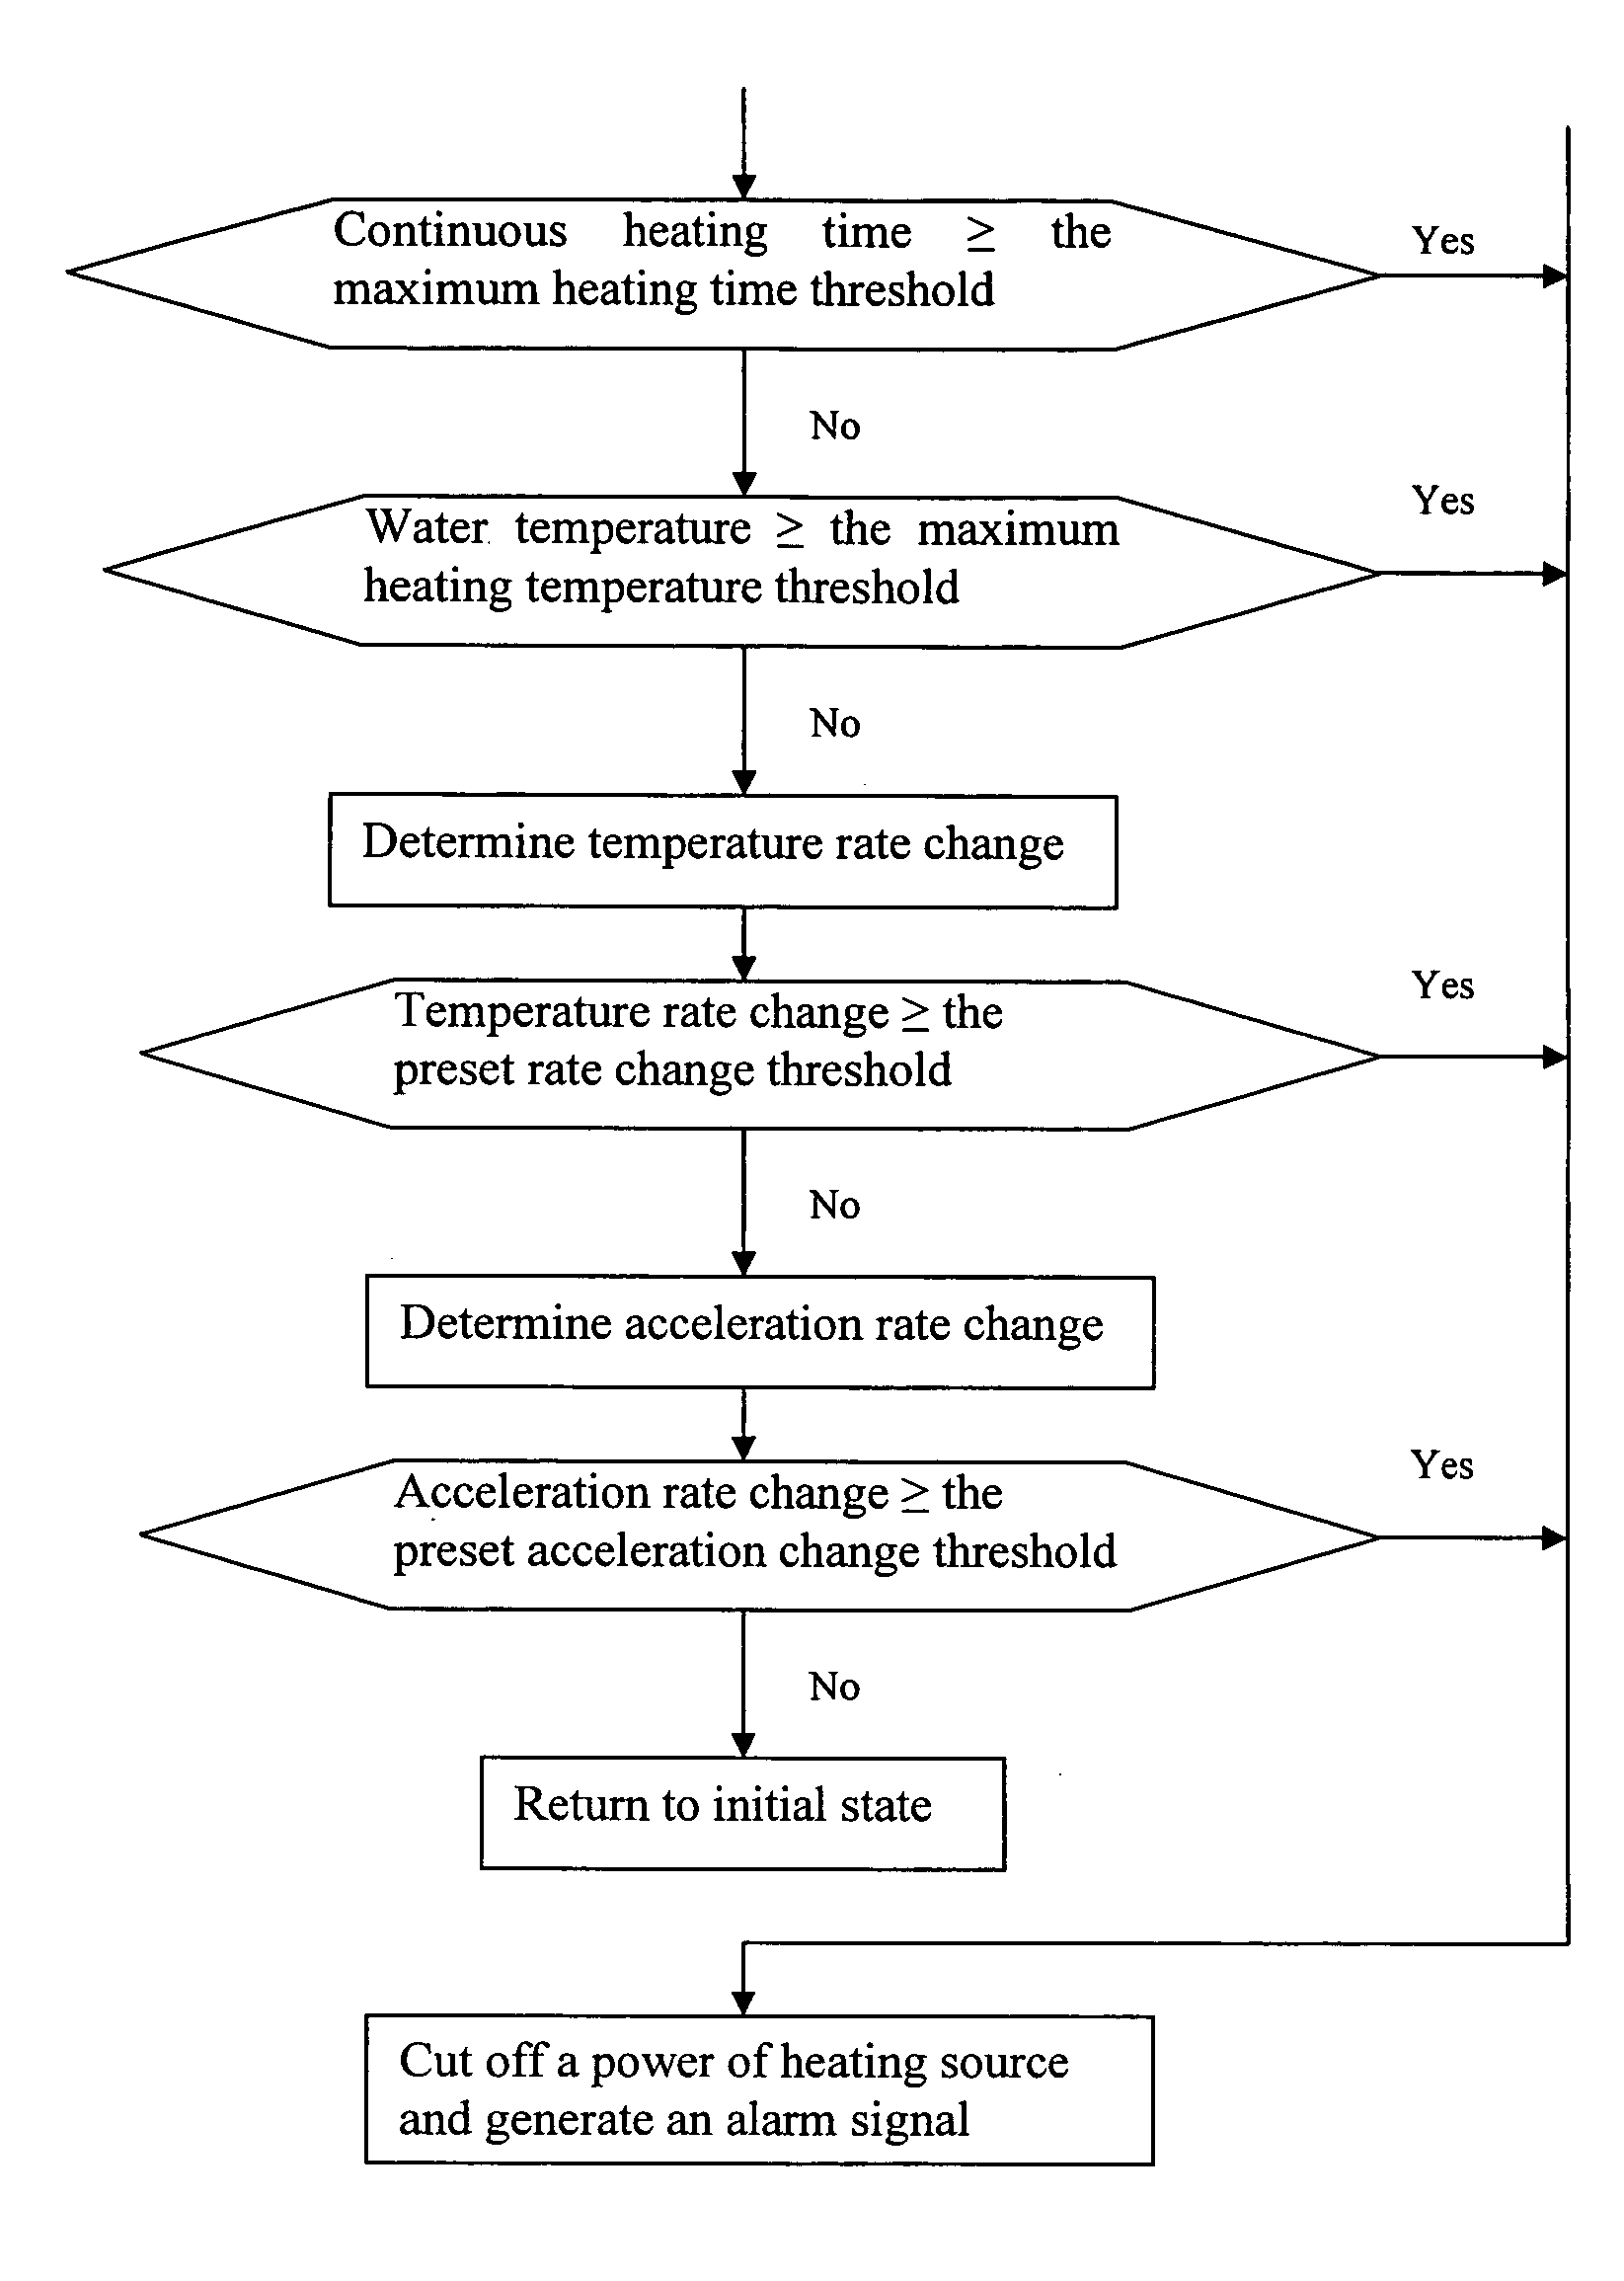 Method of Controlling Electric Kettle for "Dry" Burn Prevention